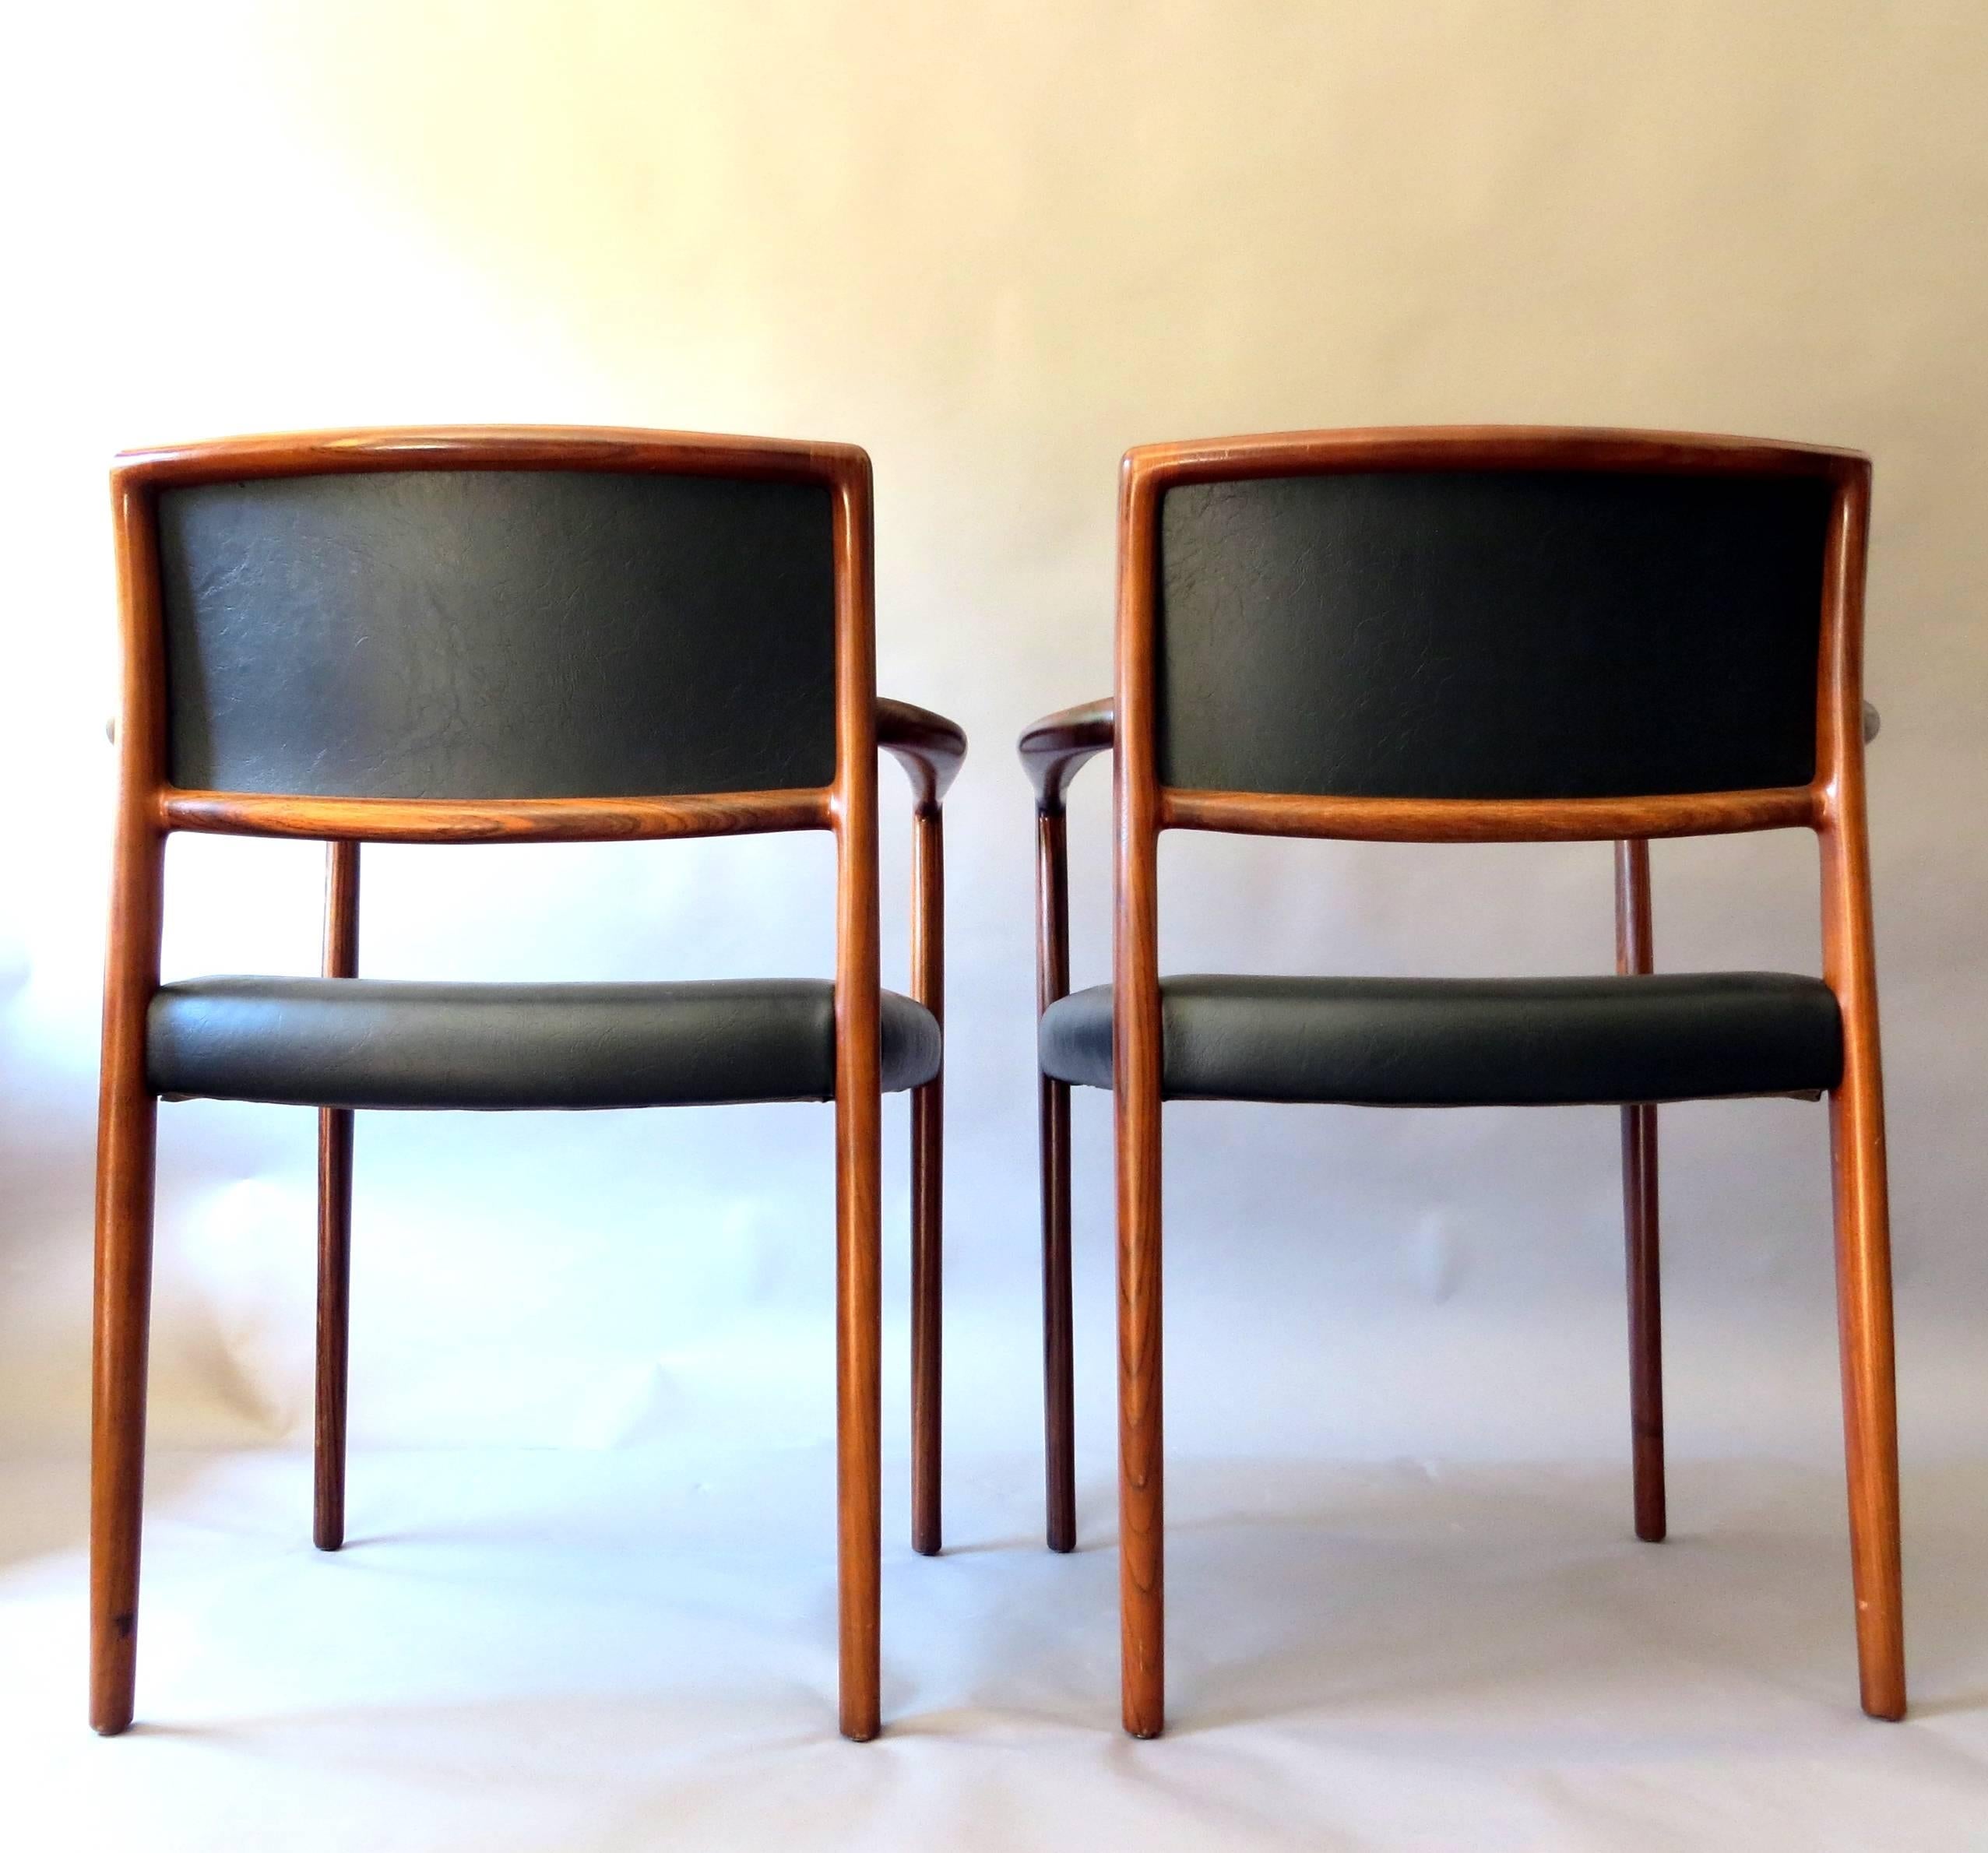 Danish Mid-Century Modern Rosewood and Leather Dining Chairs, Set of Two, 1960s For Sale 1